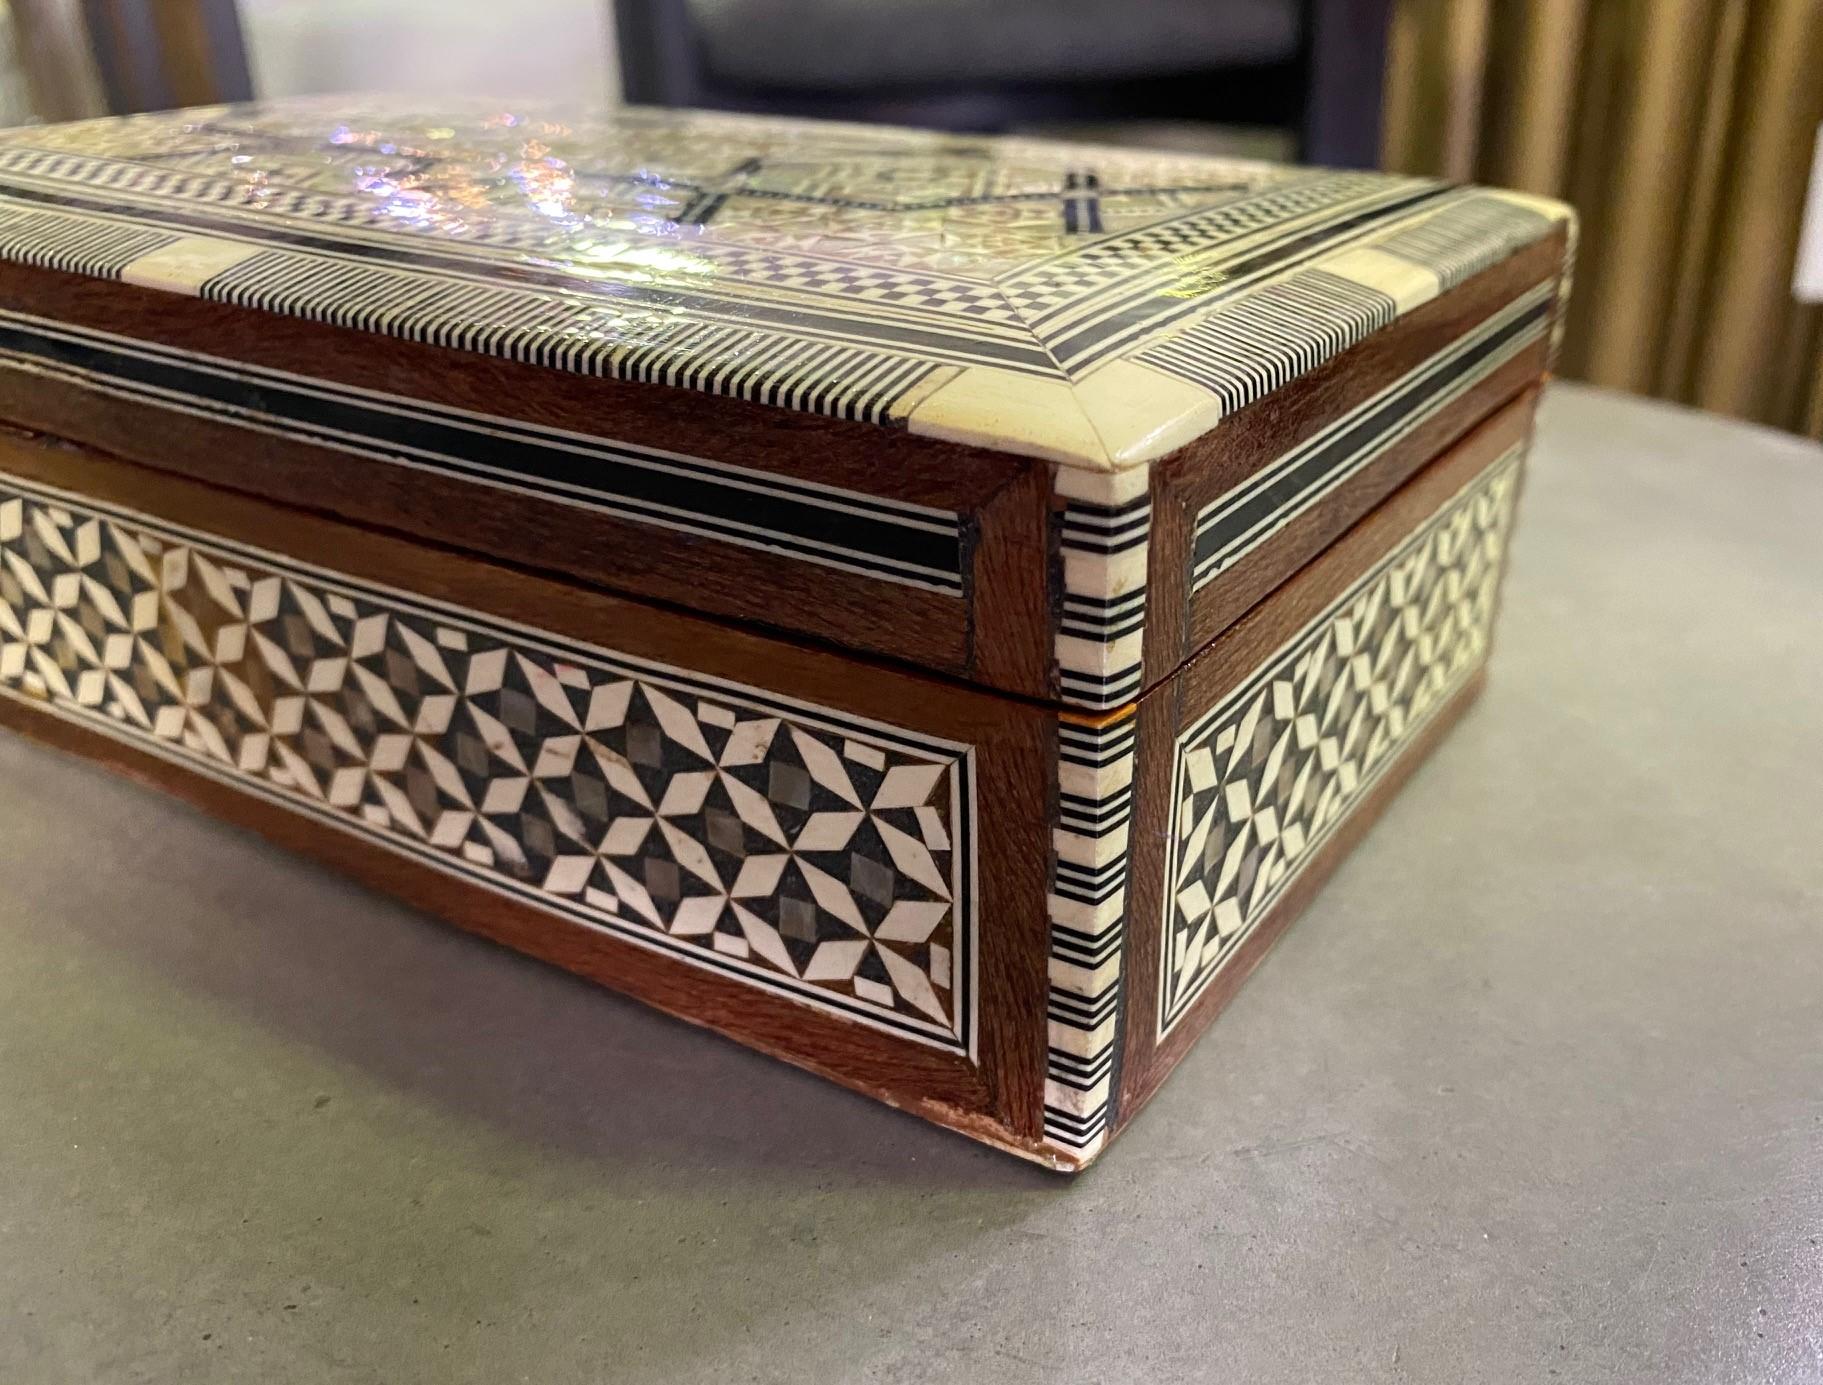 Mother-of-Pearl Syrian Moorish Middle Eastern Mother of Pearl Inlaid Mosaic Jewelry Box